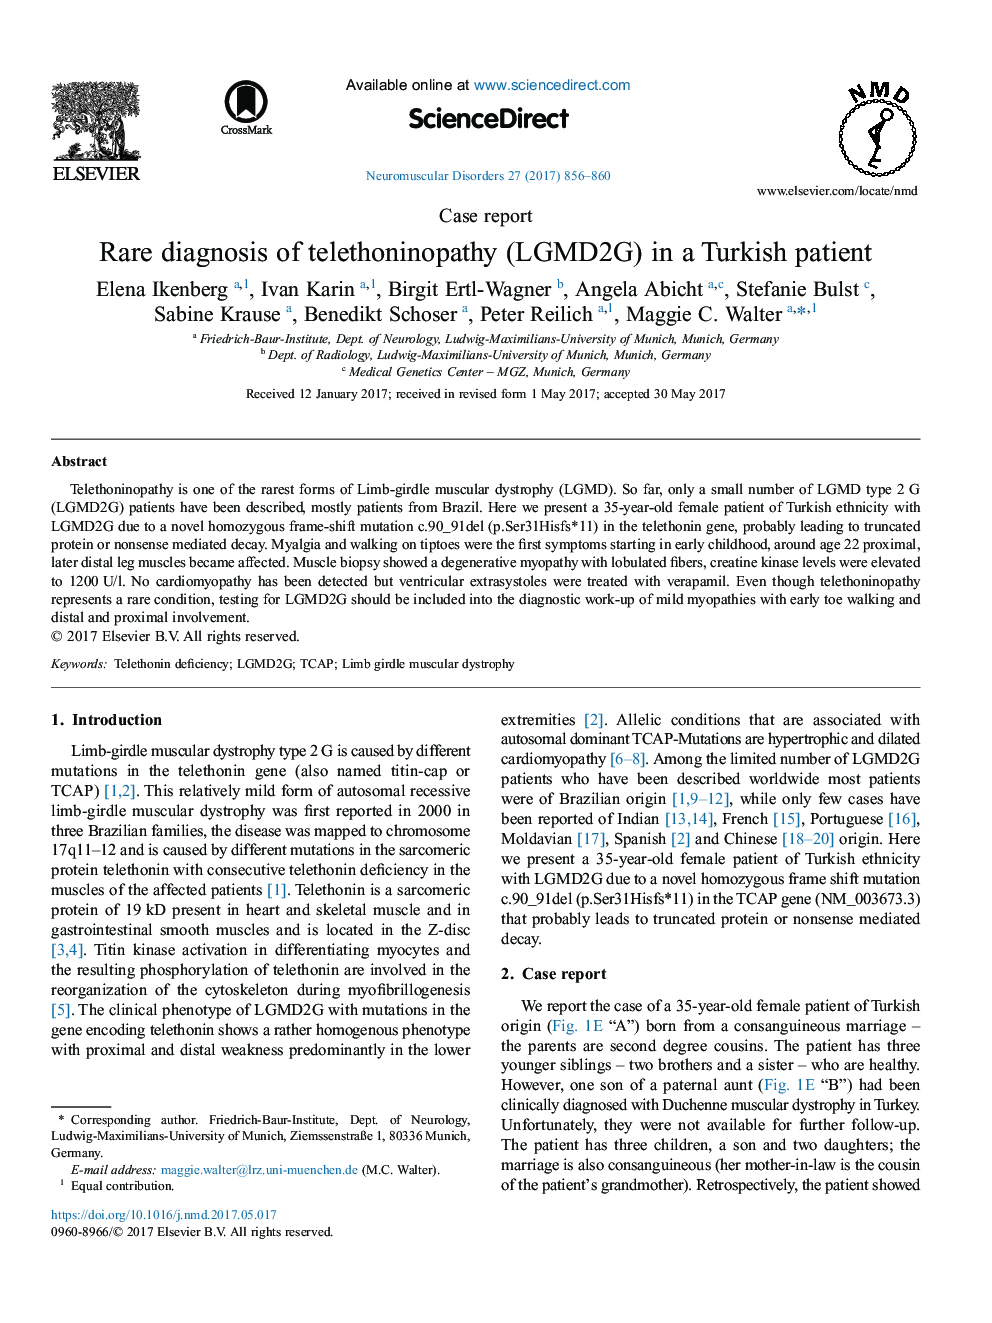 Case reportRare diagnosis of telethoninopathy (LGMD2G) in a Turkish patient